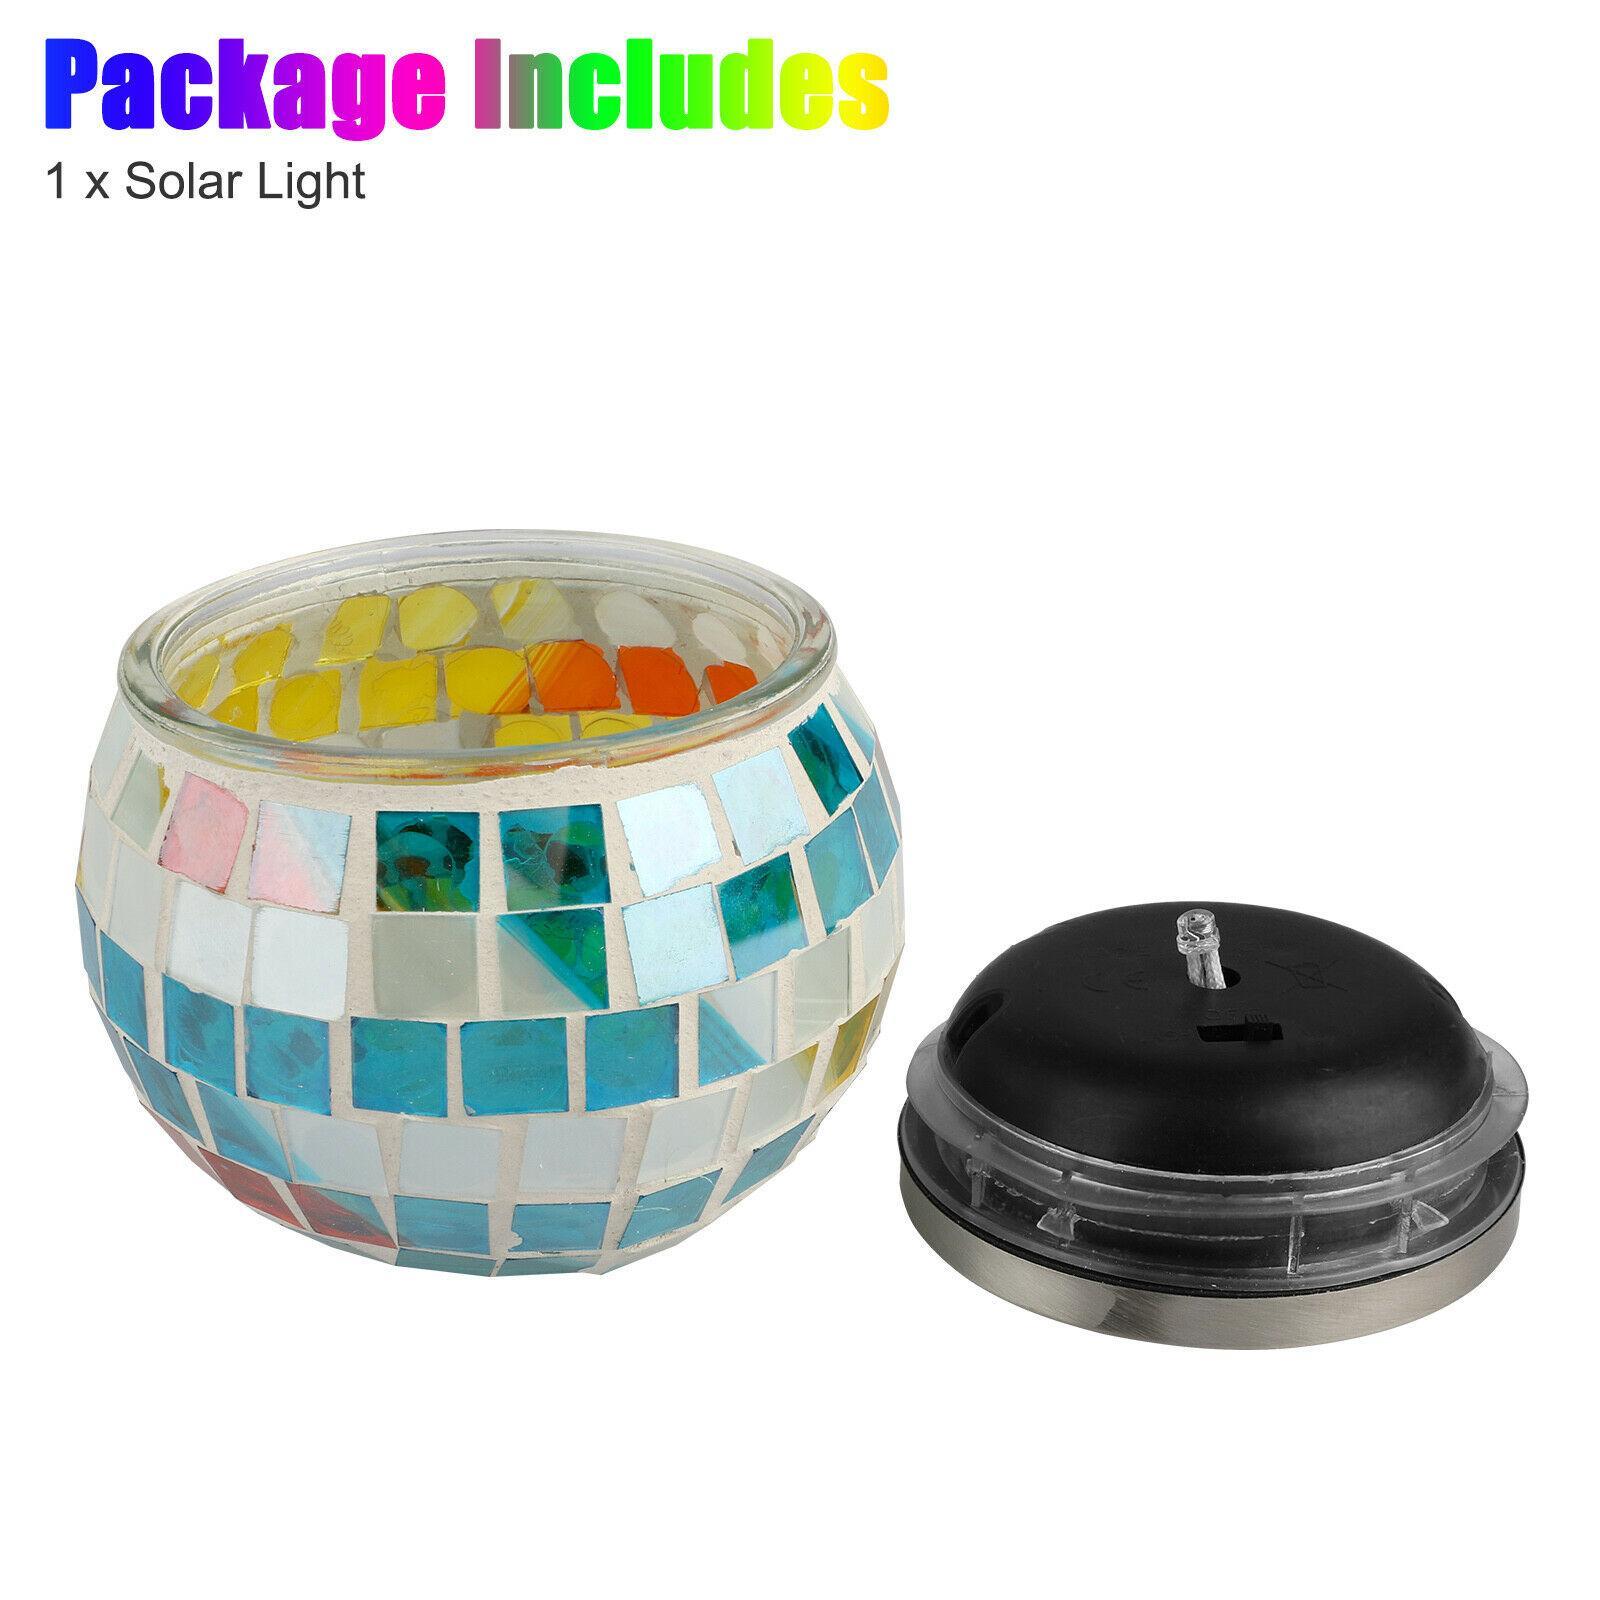 Solar Mosaic Glass Ball Color Changing LED Night Light Outdoor Garden Decor Lamp